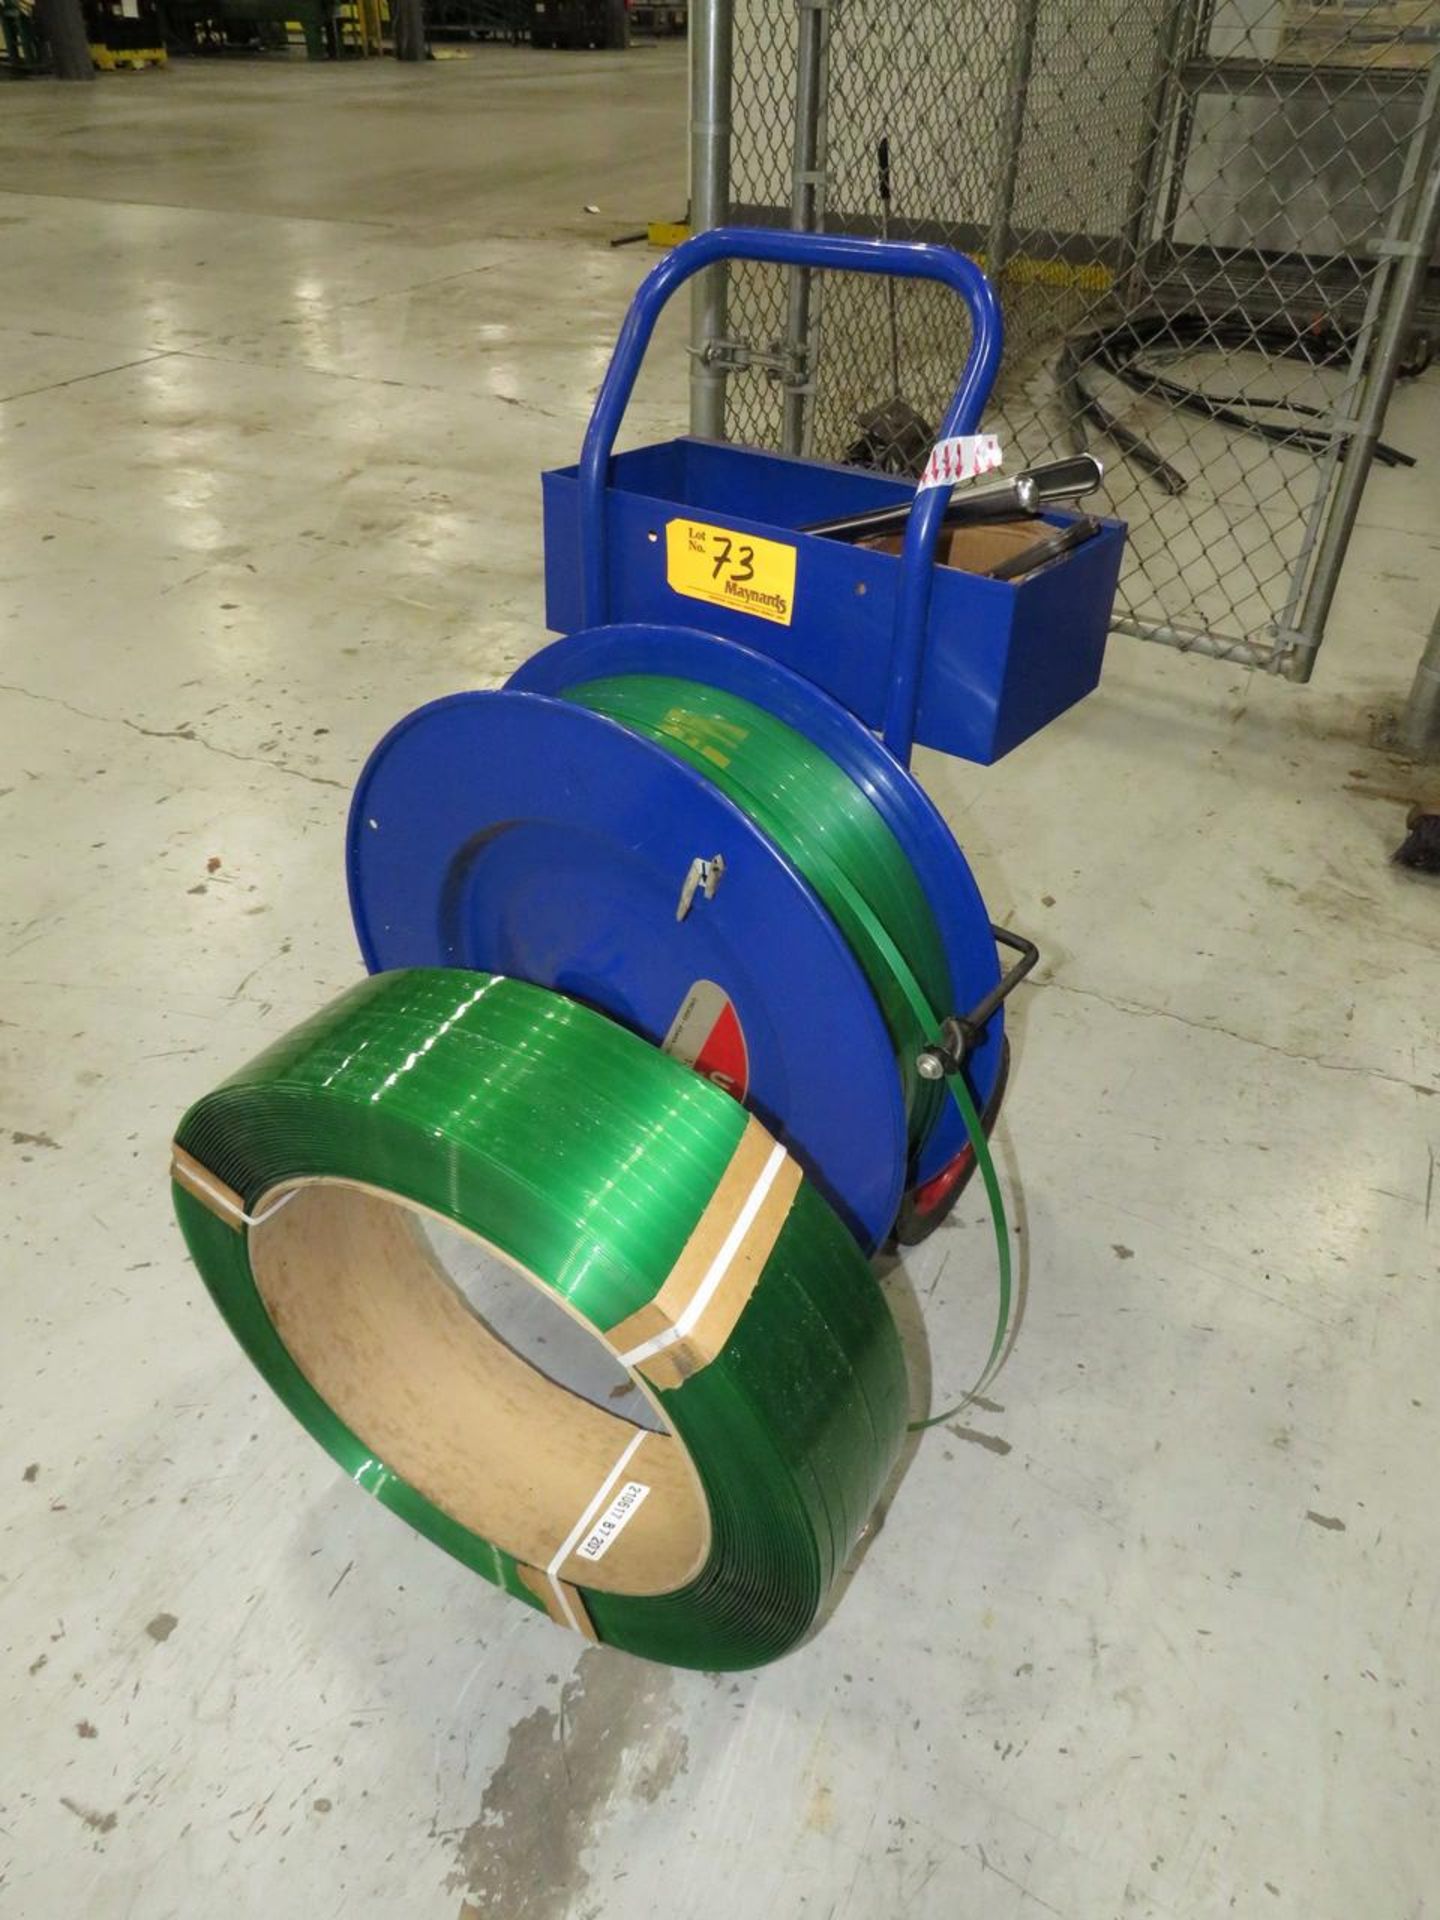 Uline Banding Cart with Strapping Material